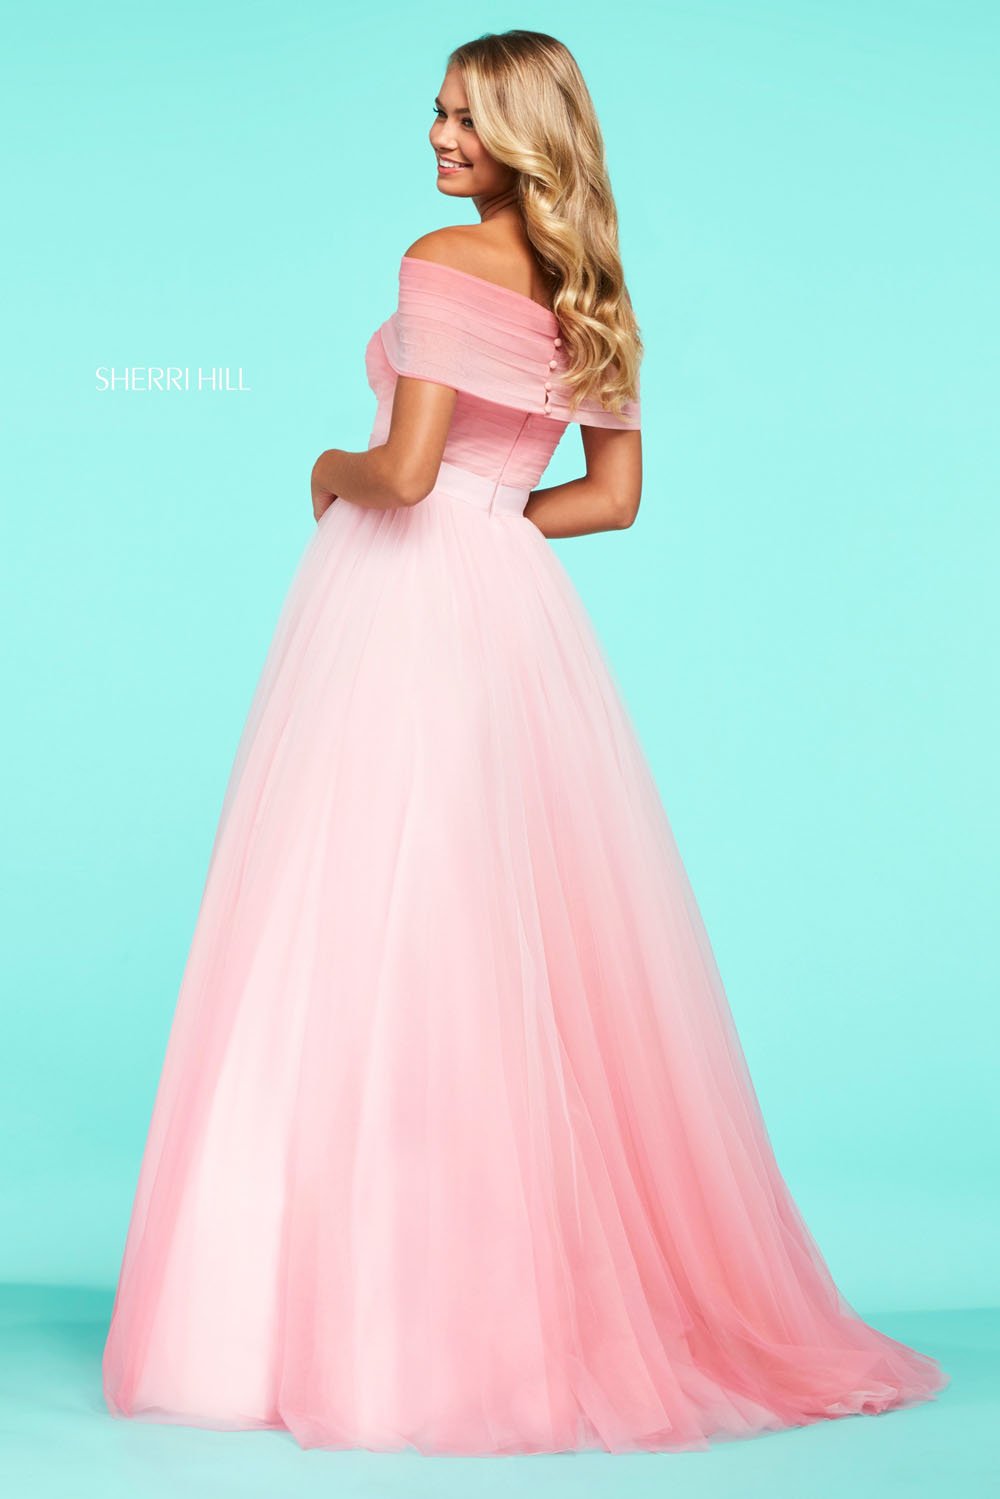 Sherri Hill 53438 dress images in these colors: Light Green Ombre, Light Blue Ombre, Light Pink Ombre.